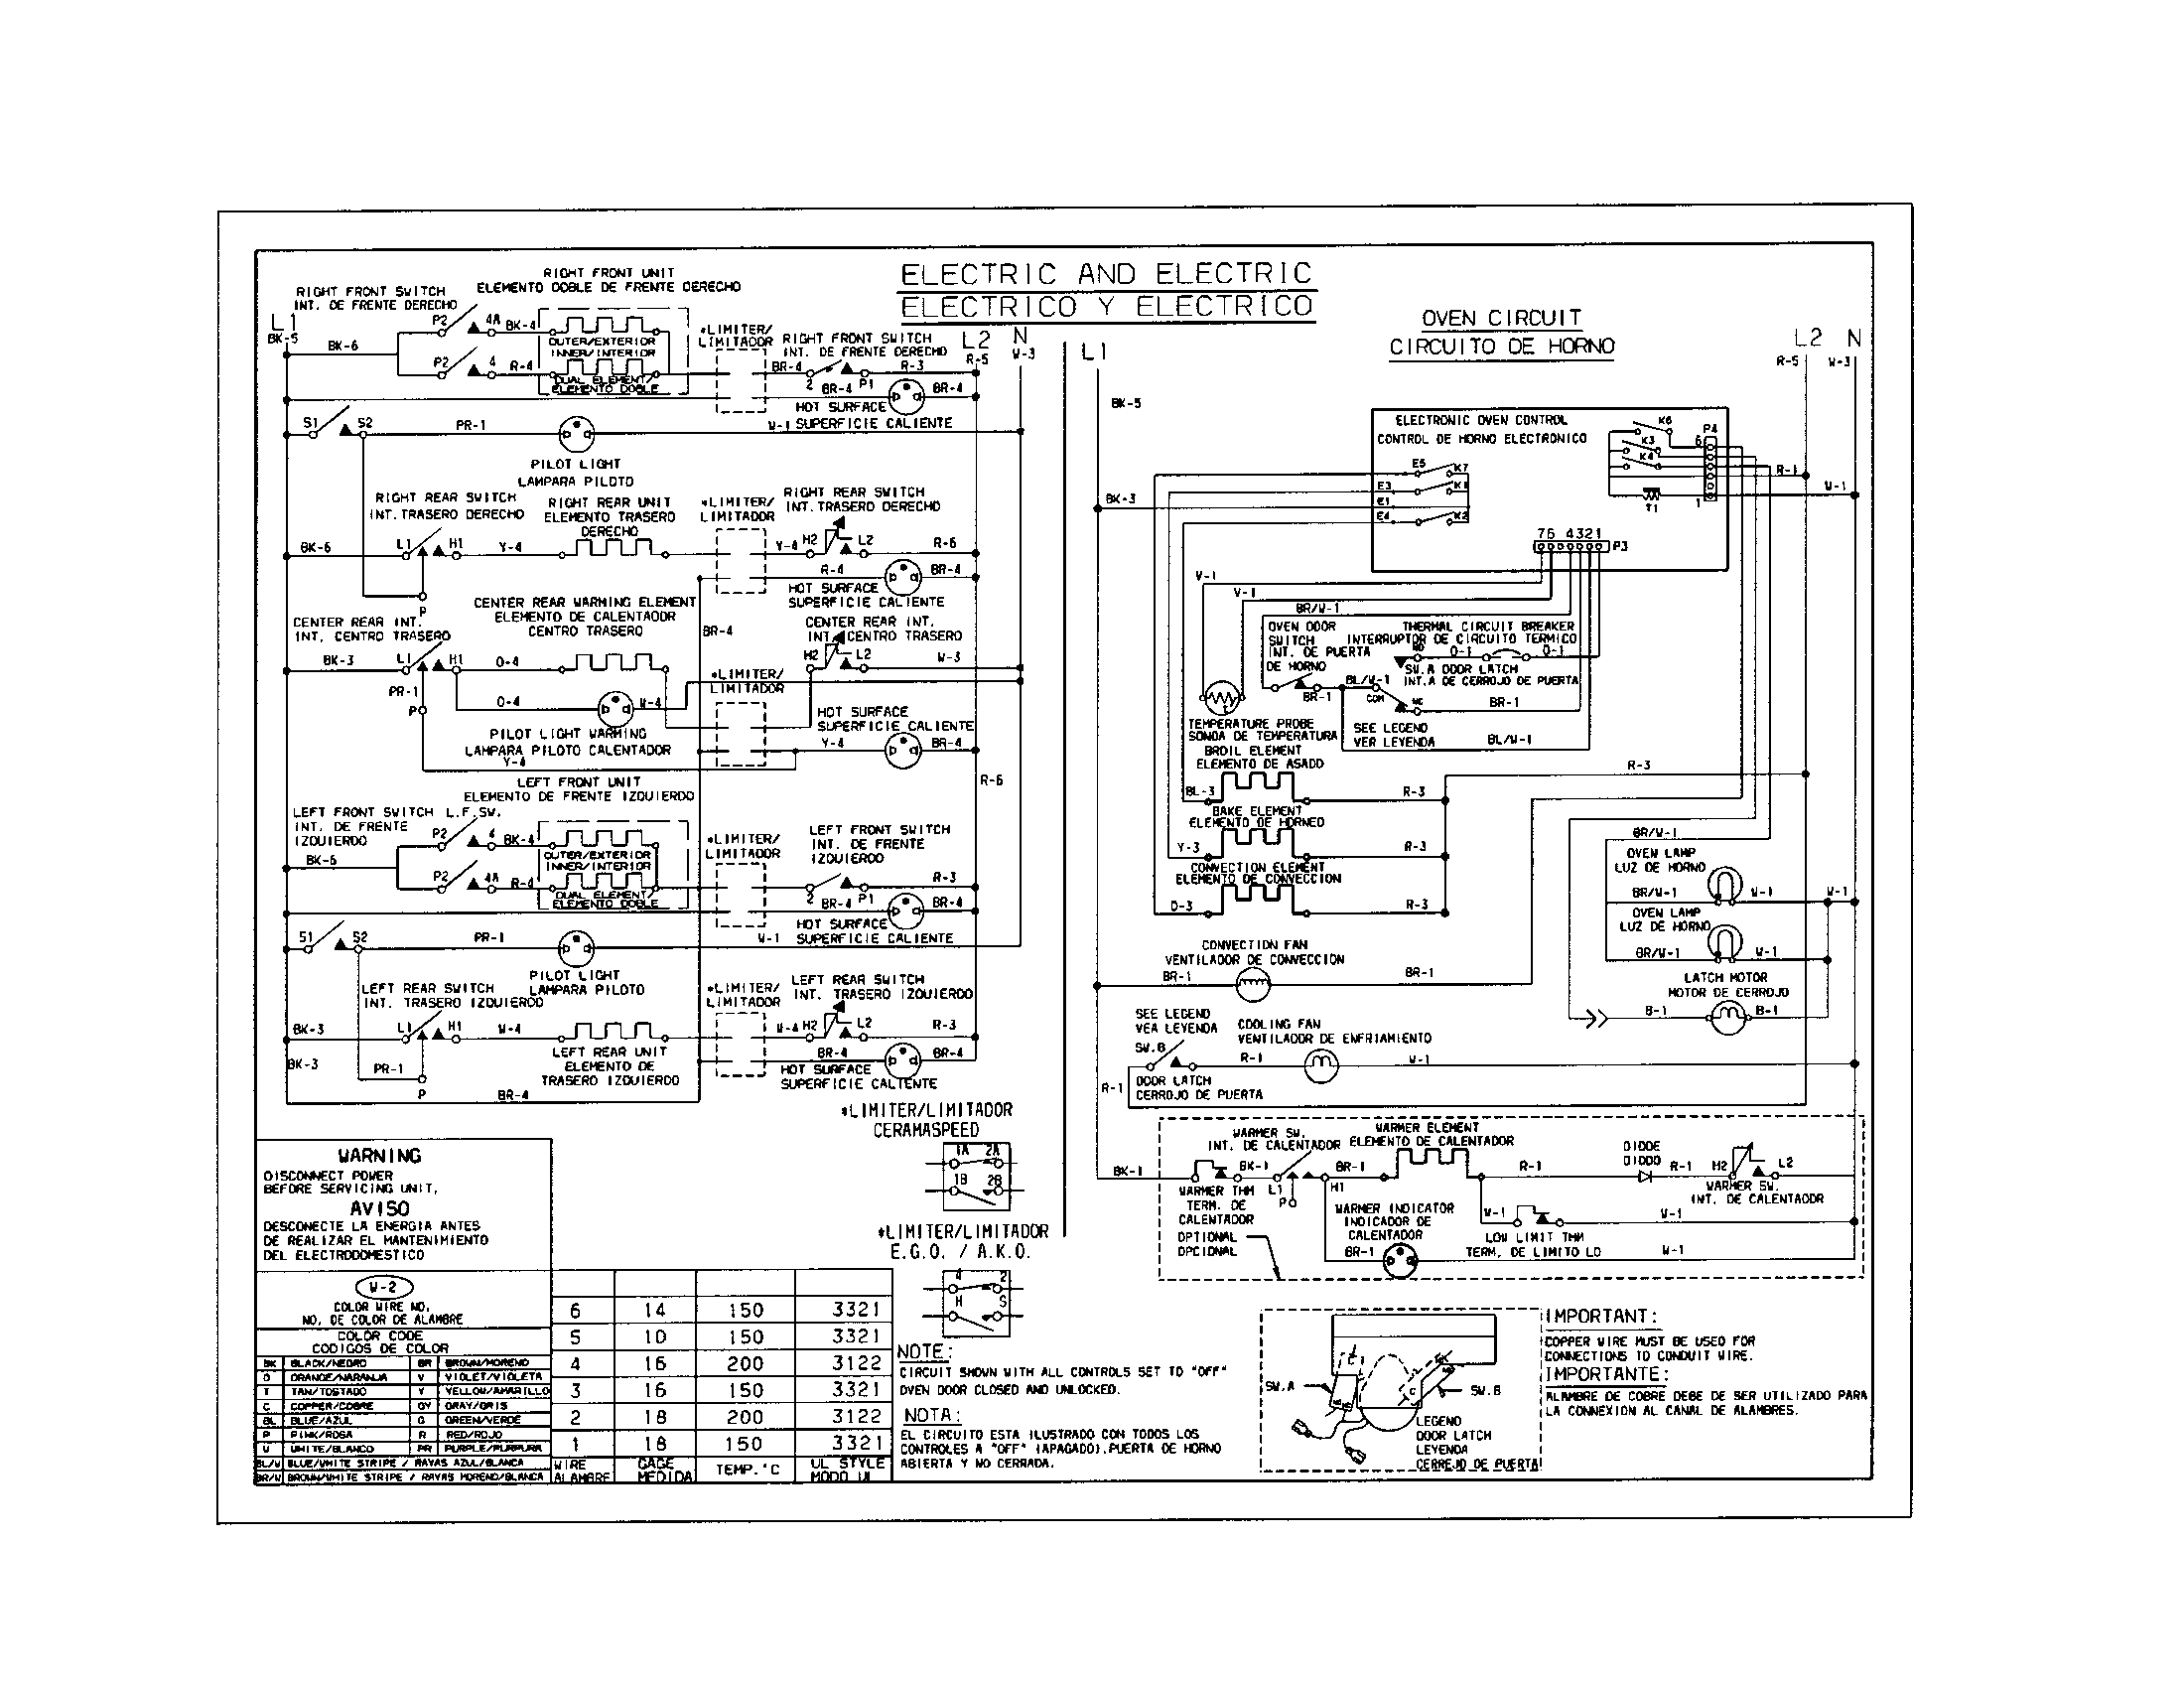 sears dryer wiring diagram wiring diagram mix sears kenmore dryer wiring diagram schematic diagram databaseelectrical schematic